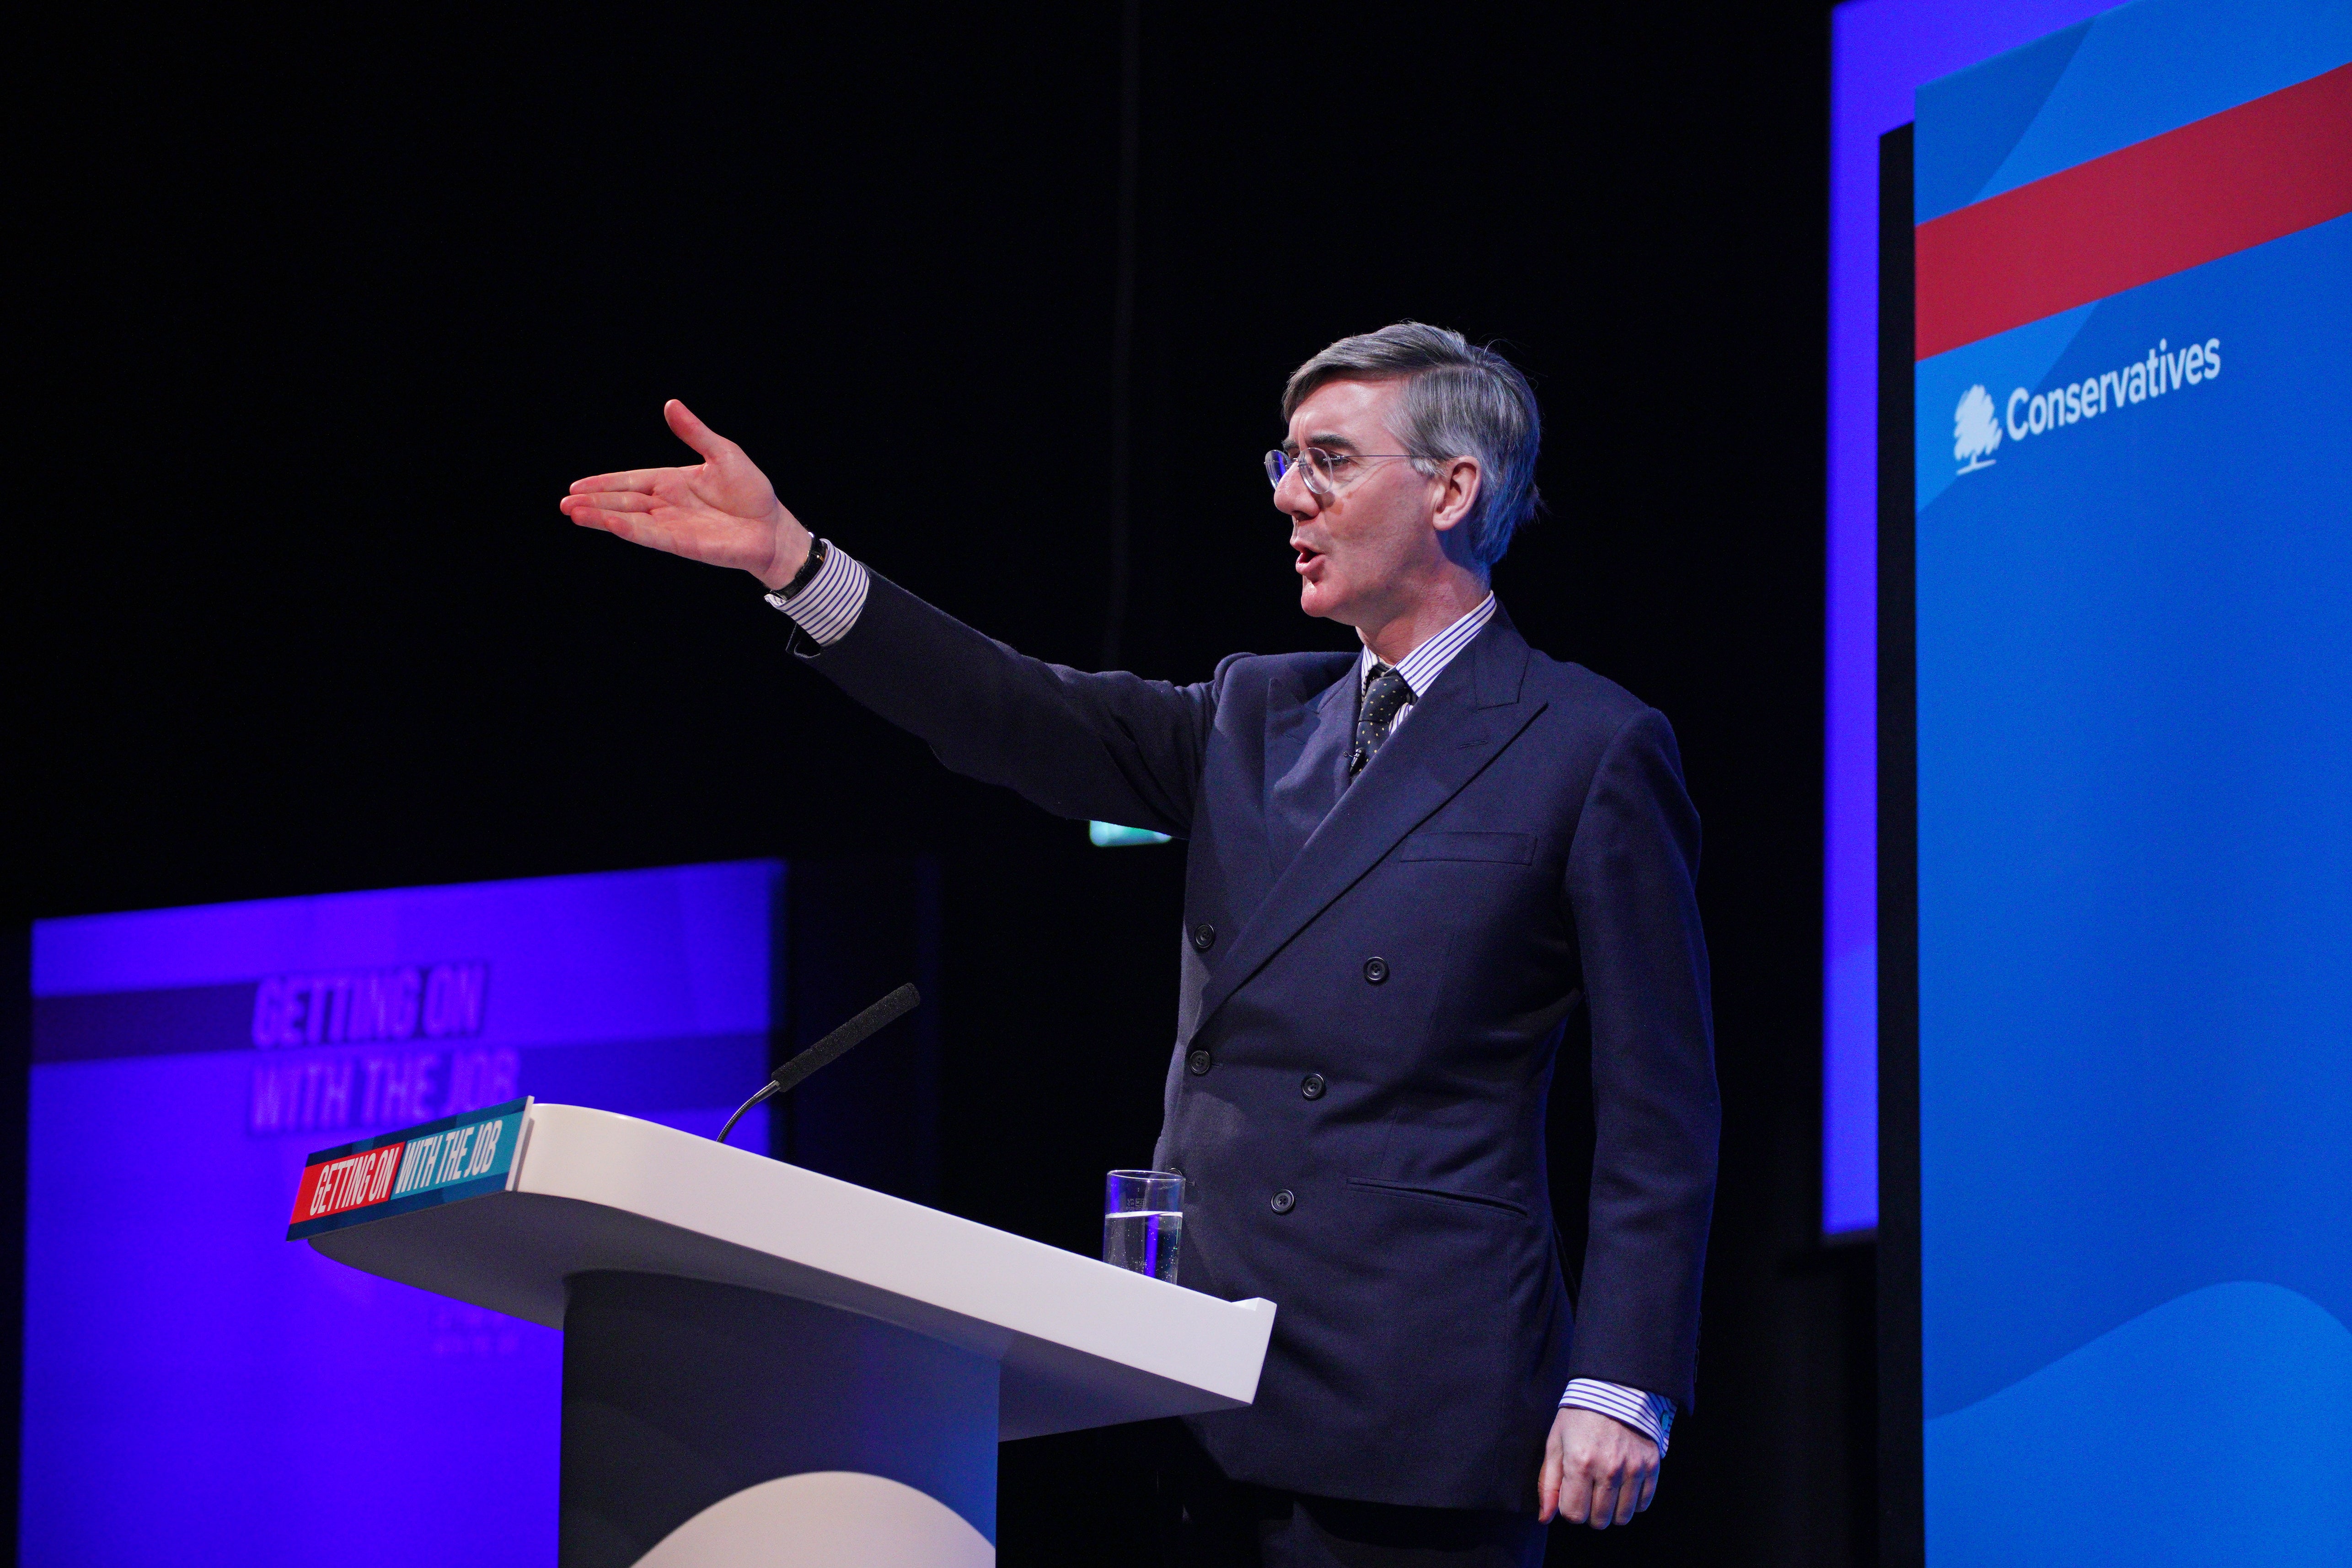 Brexit minister Jacob Rees-Mogg was among several senior Tories to make a disparaging reference to ‘woke’ culture